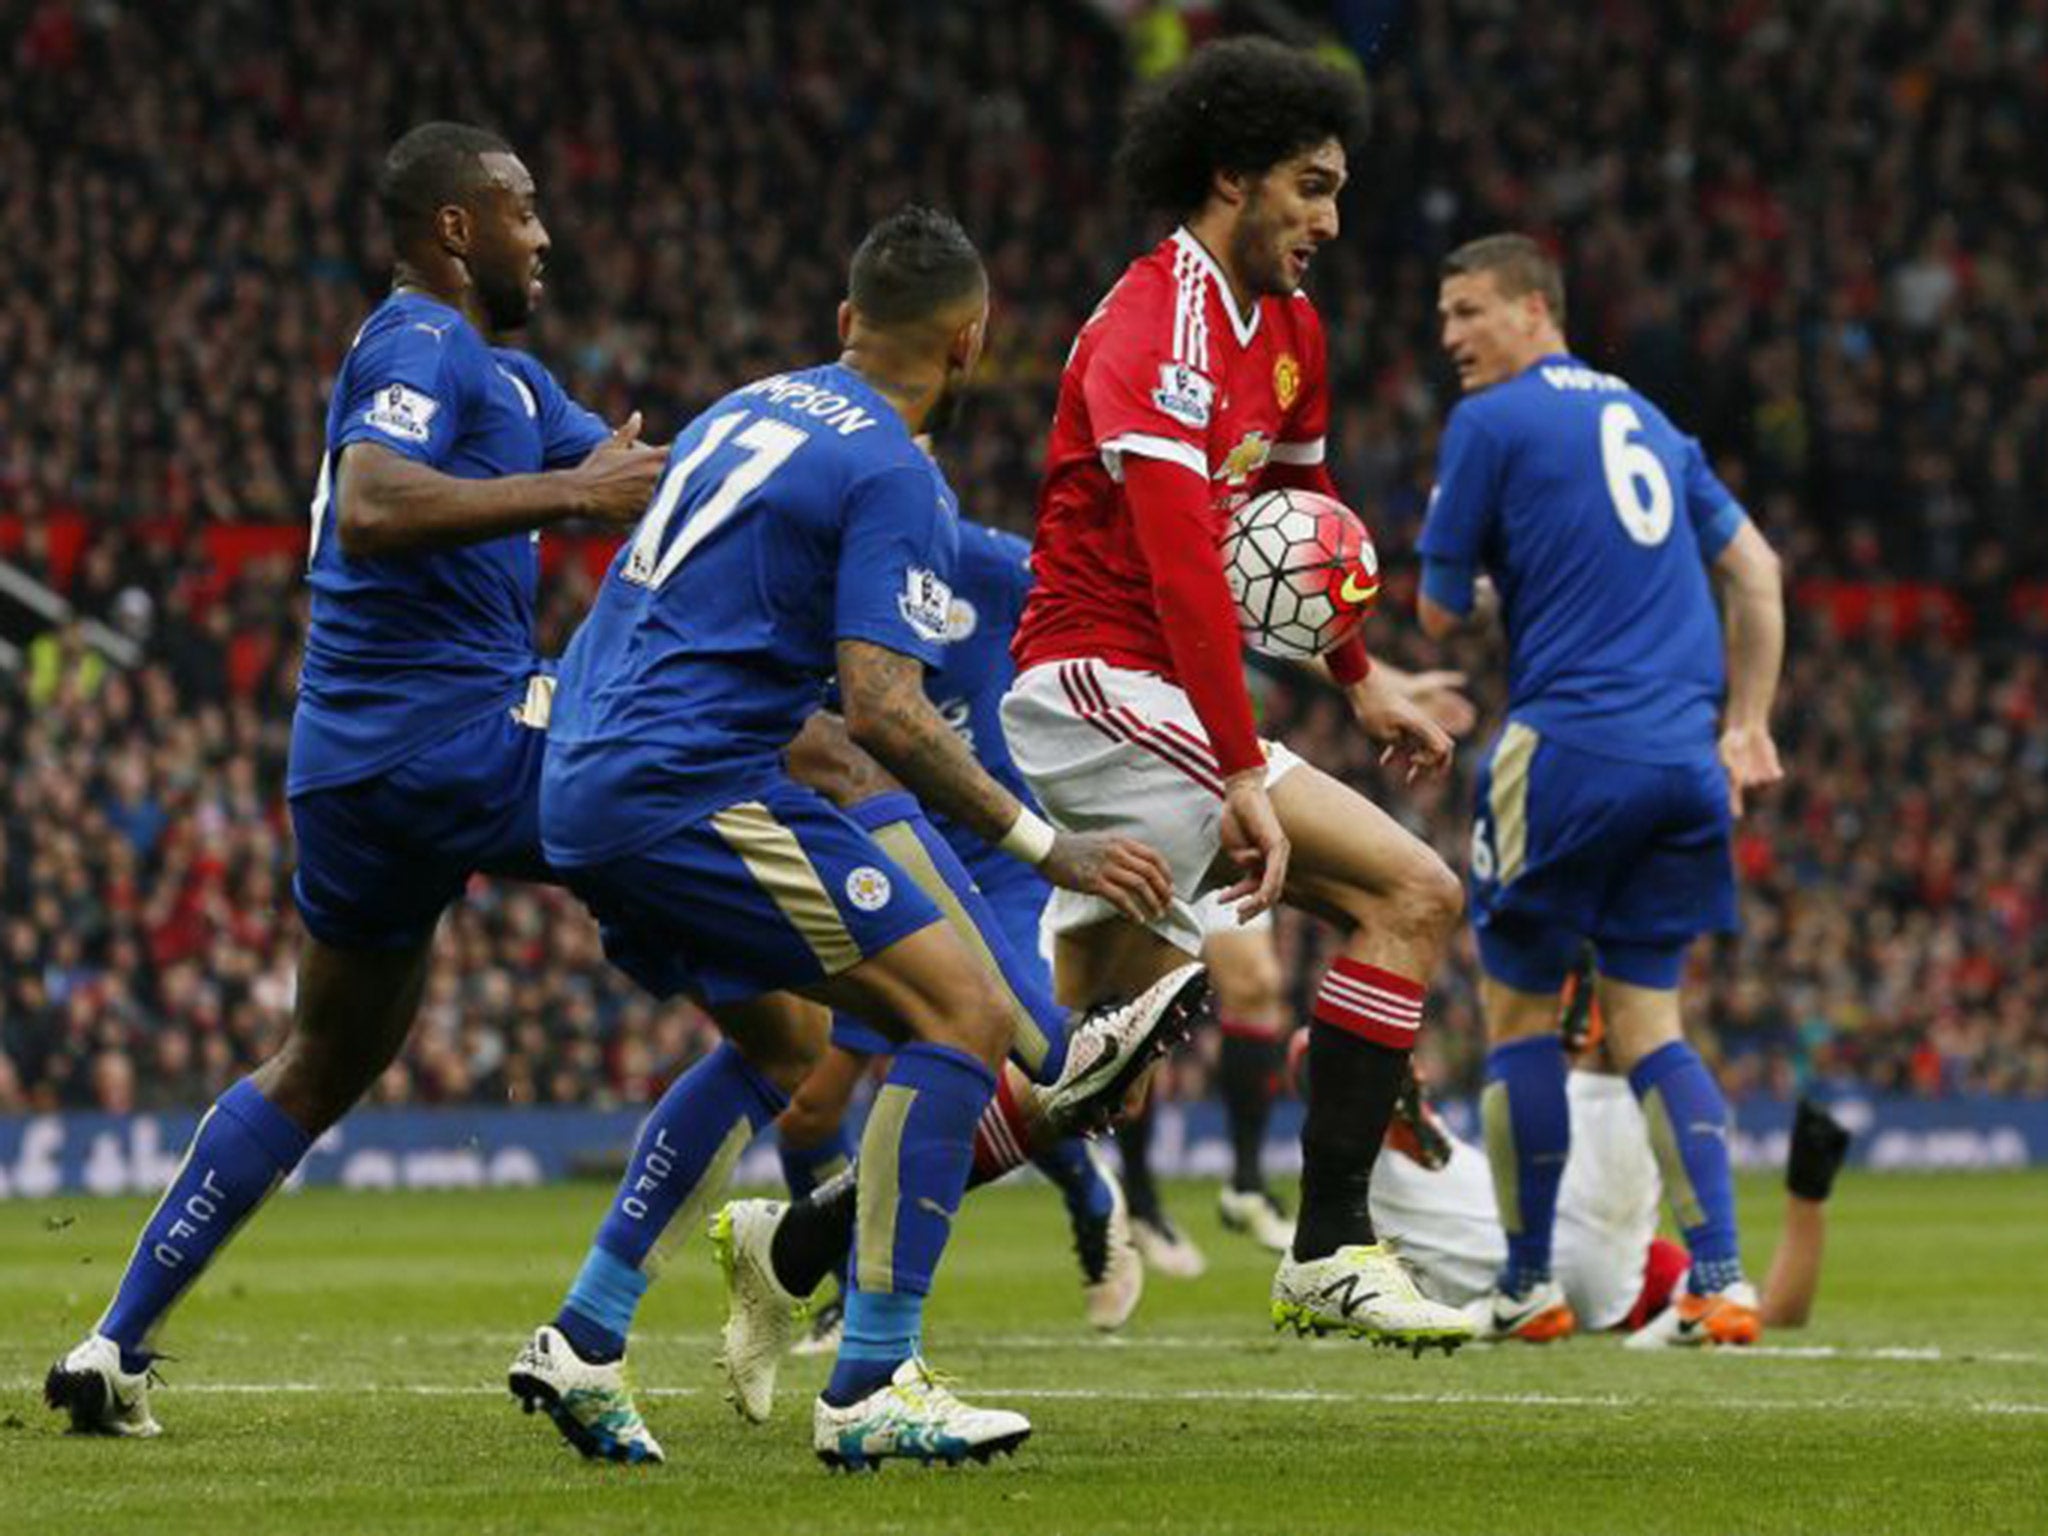 Marouane Fellaini appeared to elbow Robert Huth in the face